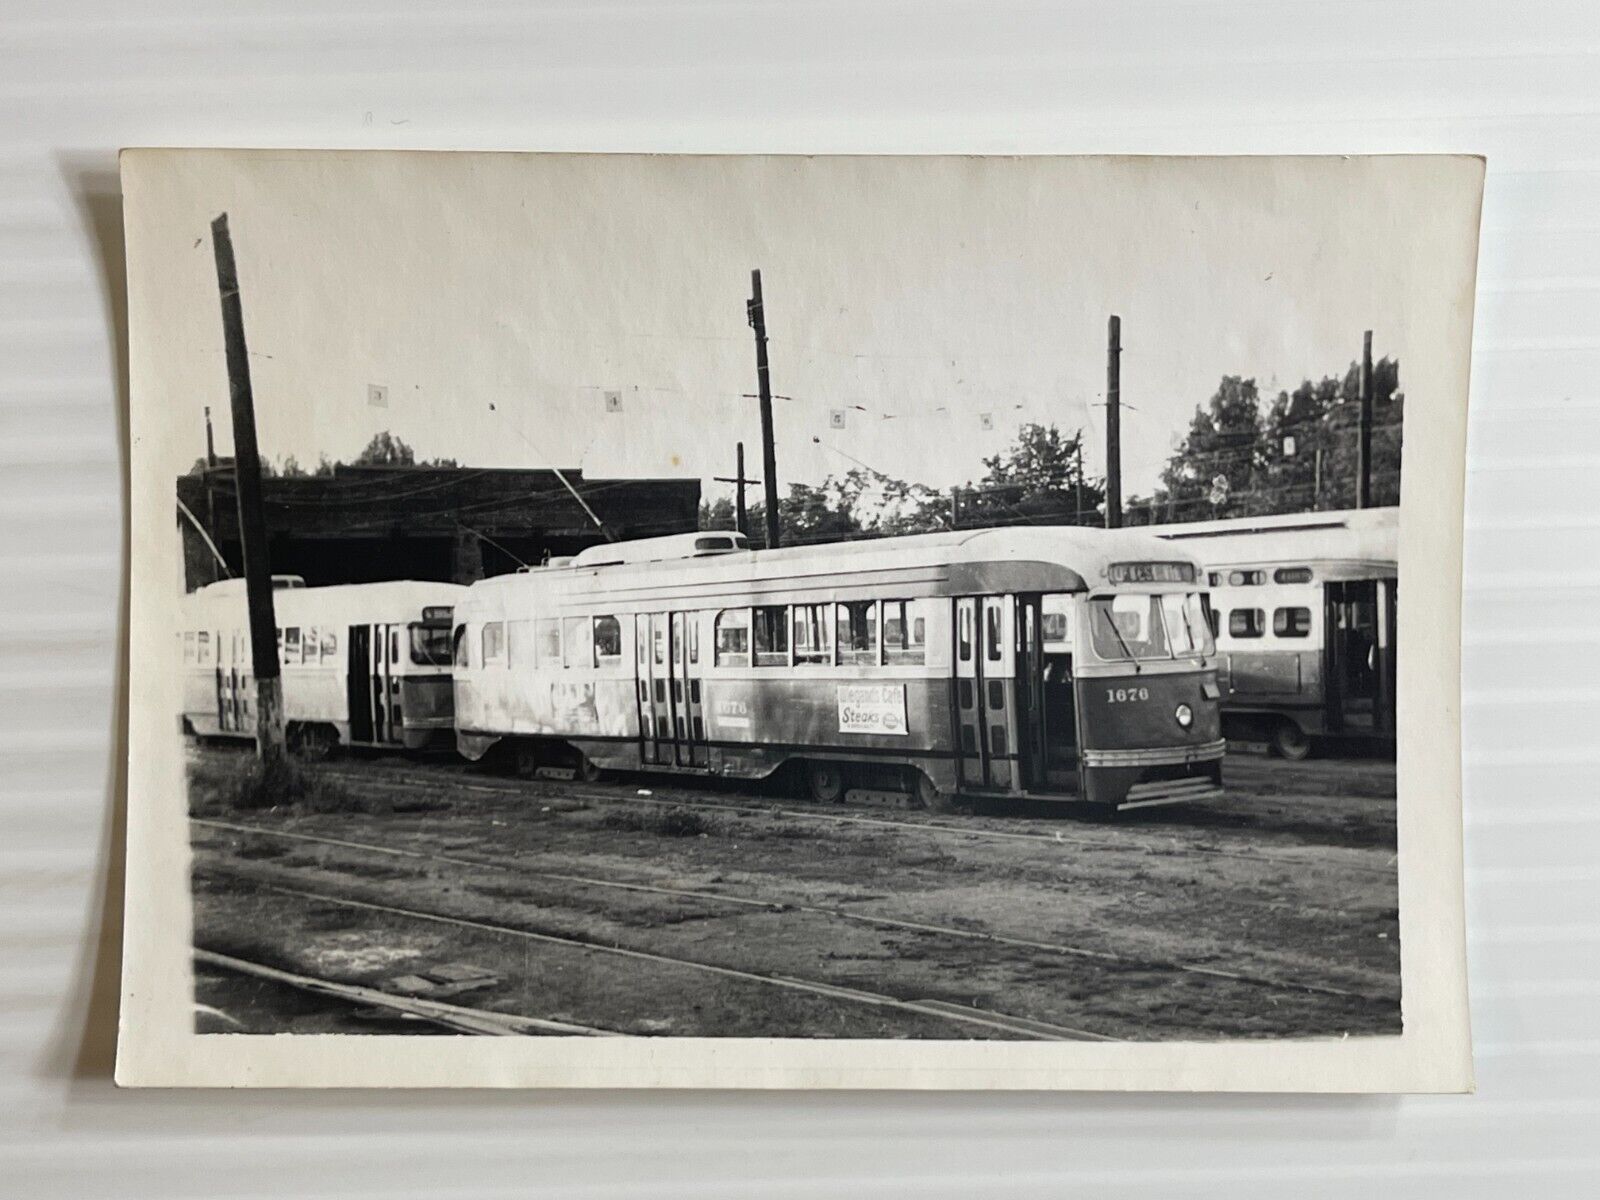 Vintage 1950s - Pittsburgh Railways PCC Cars At Car Barn Photo - (5 In x 3.5 In)